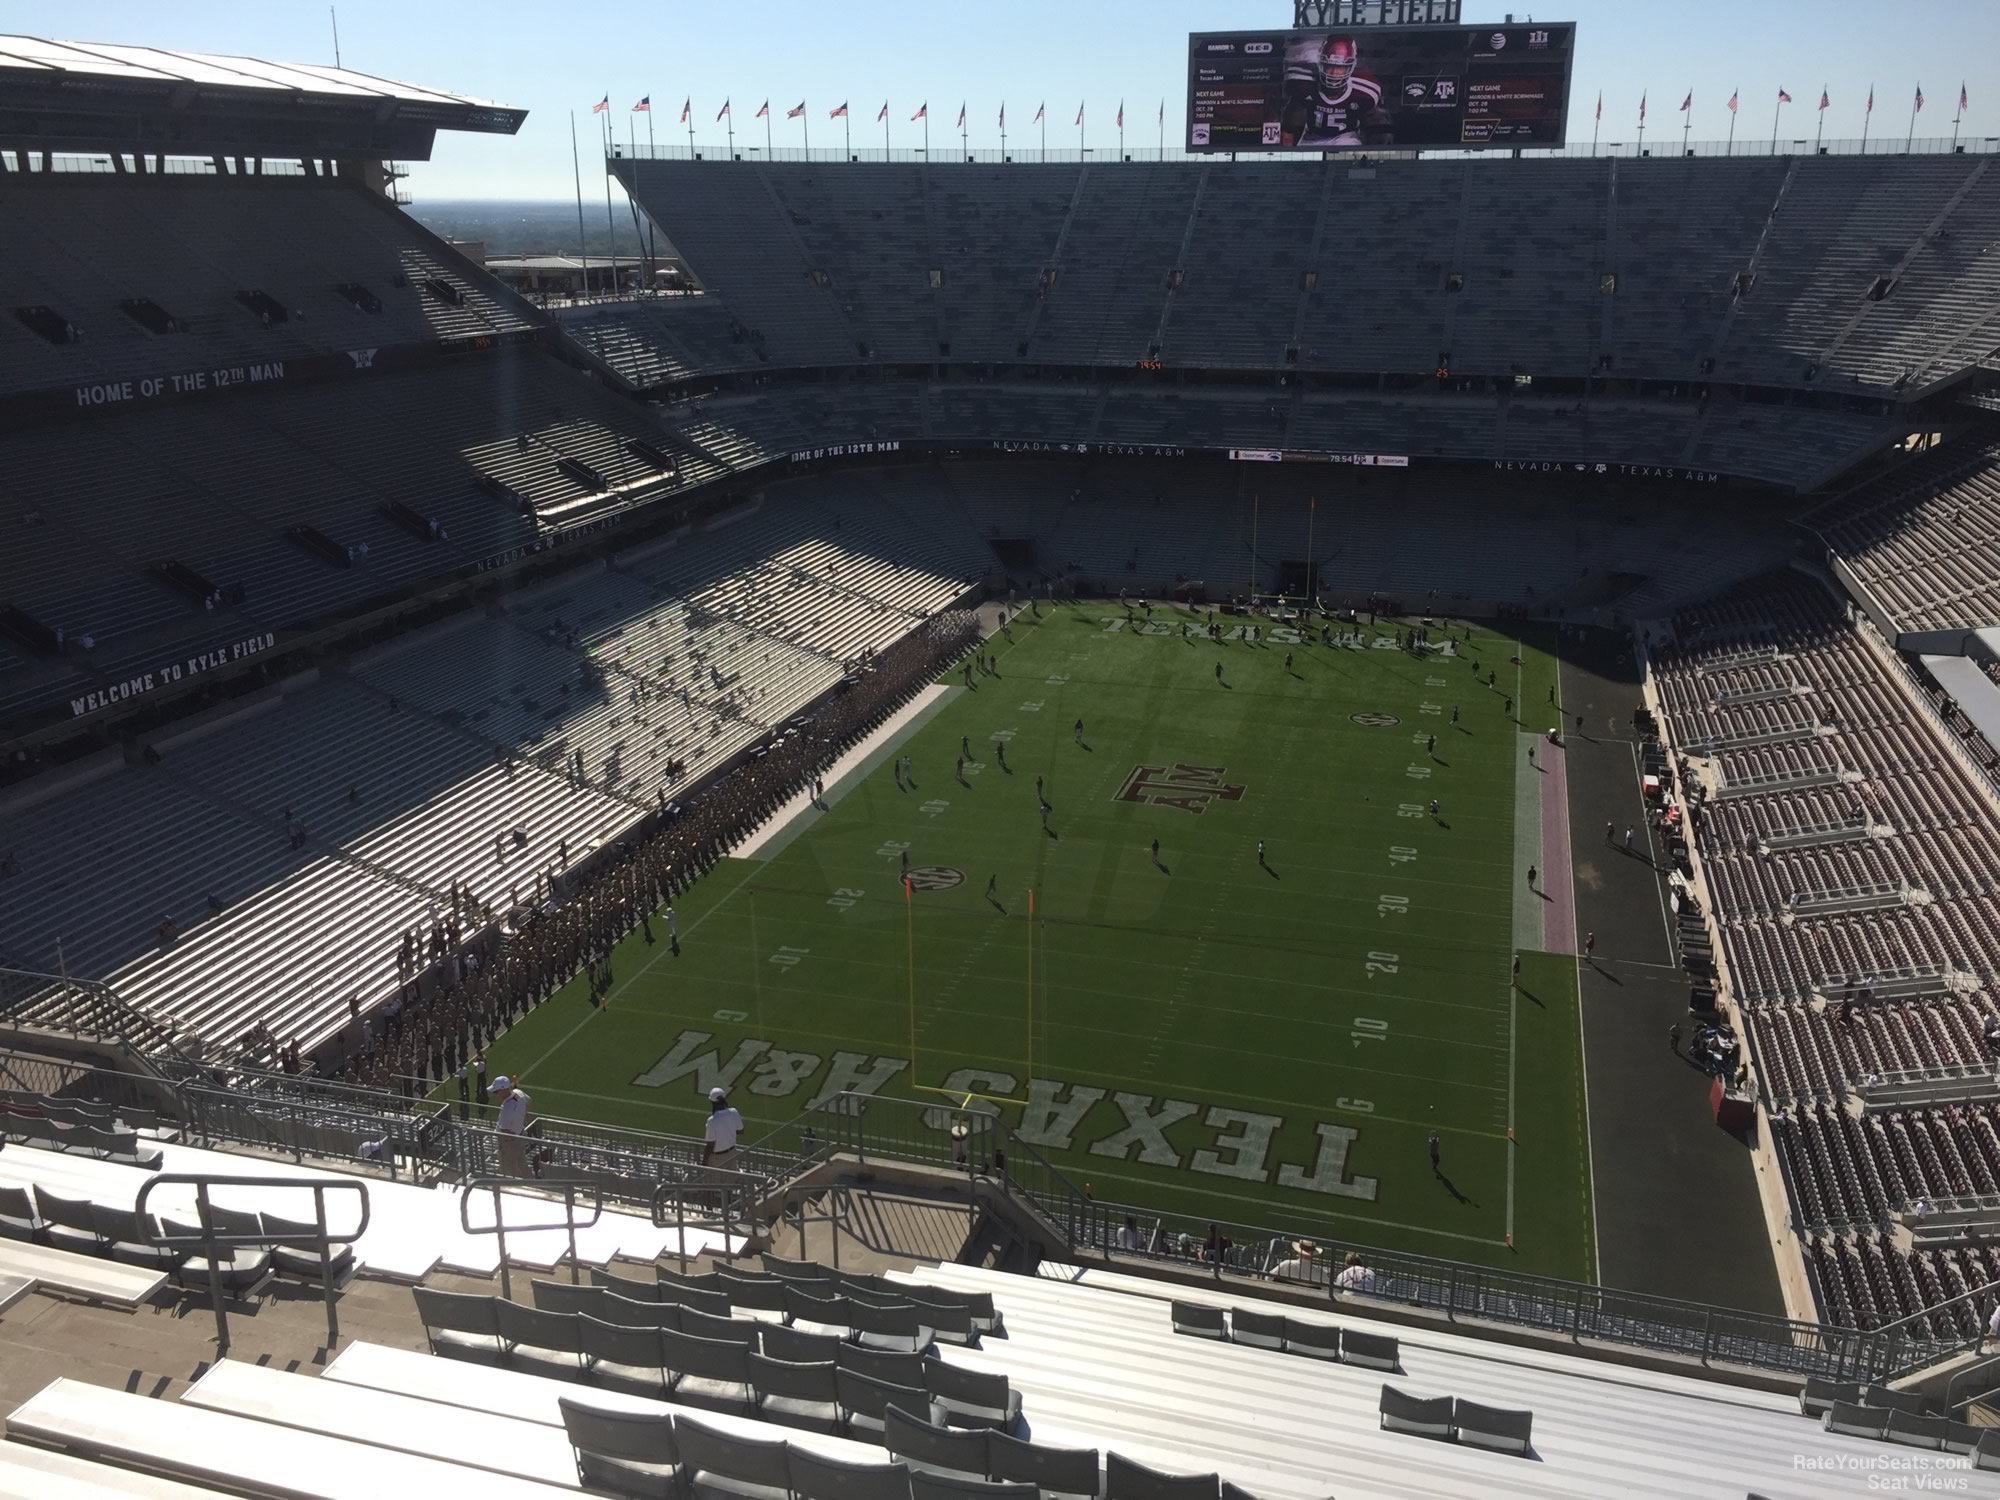 section 413, row 20 seat view  - kyle field